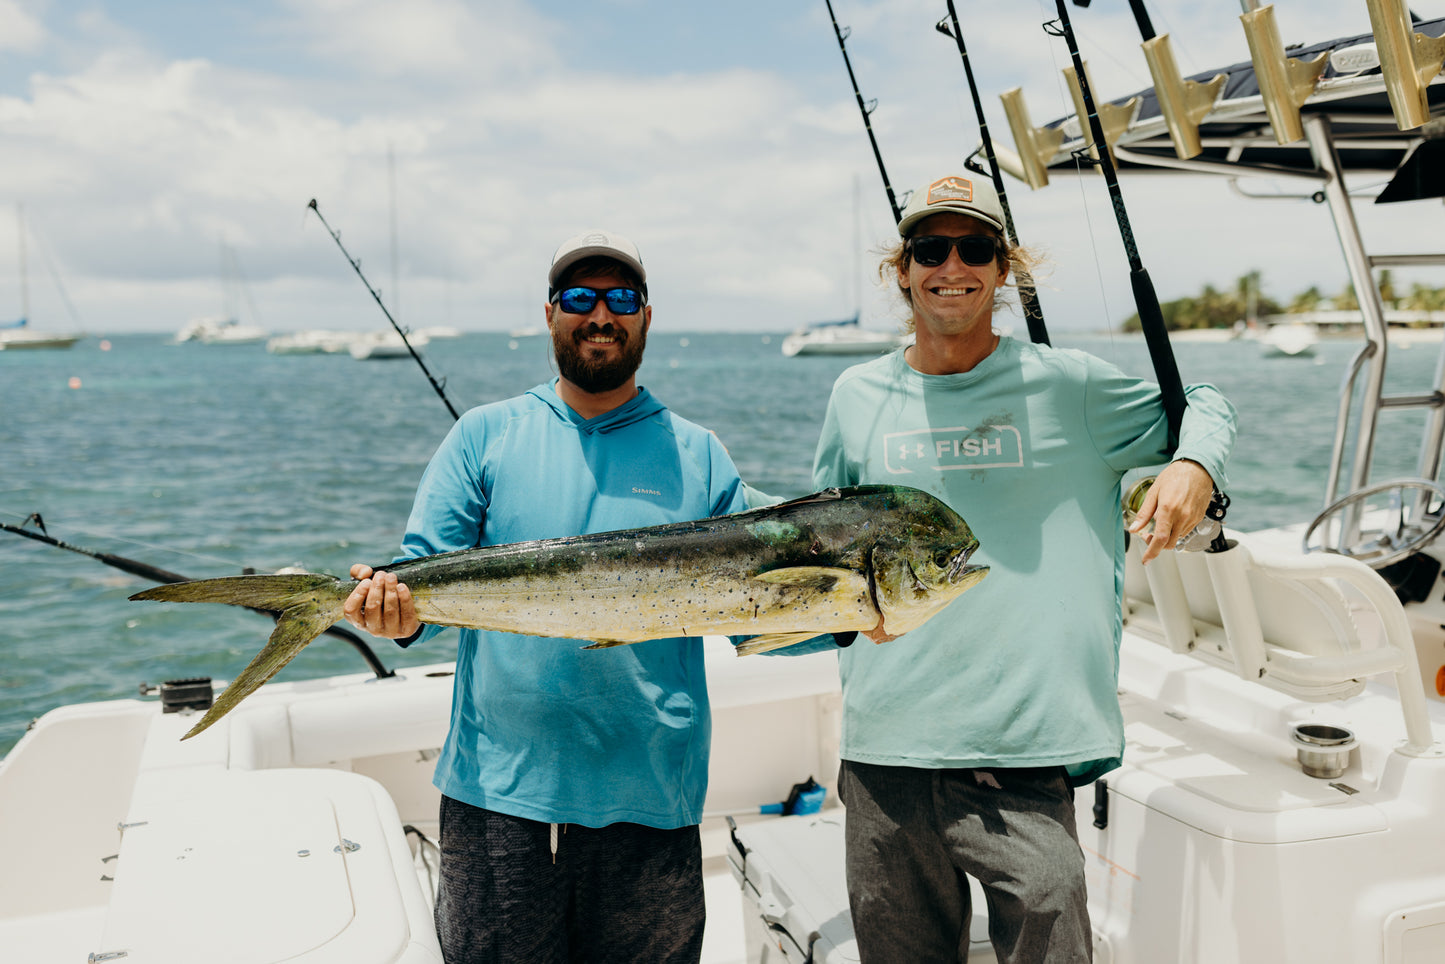 4-Hour Fishing Charter - PAY IN FULL